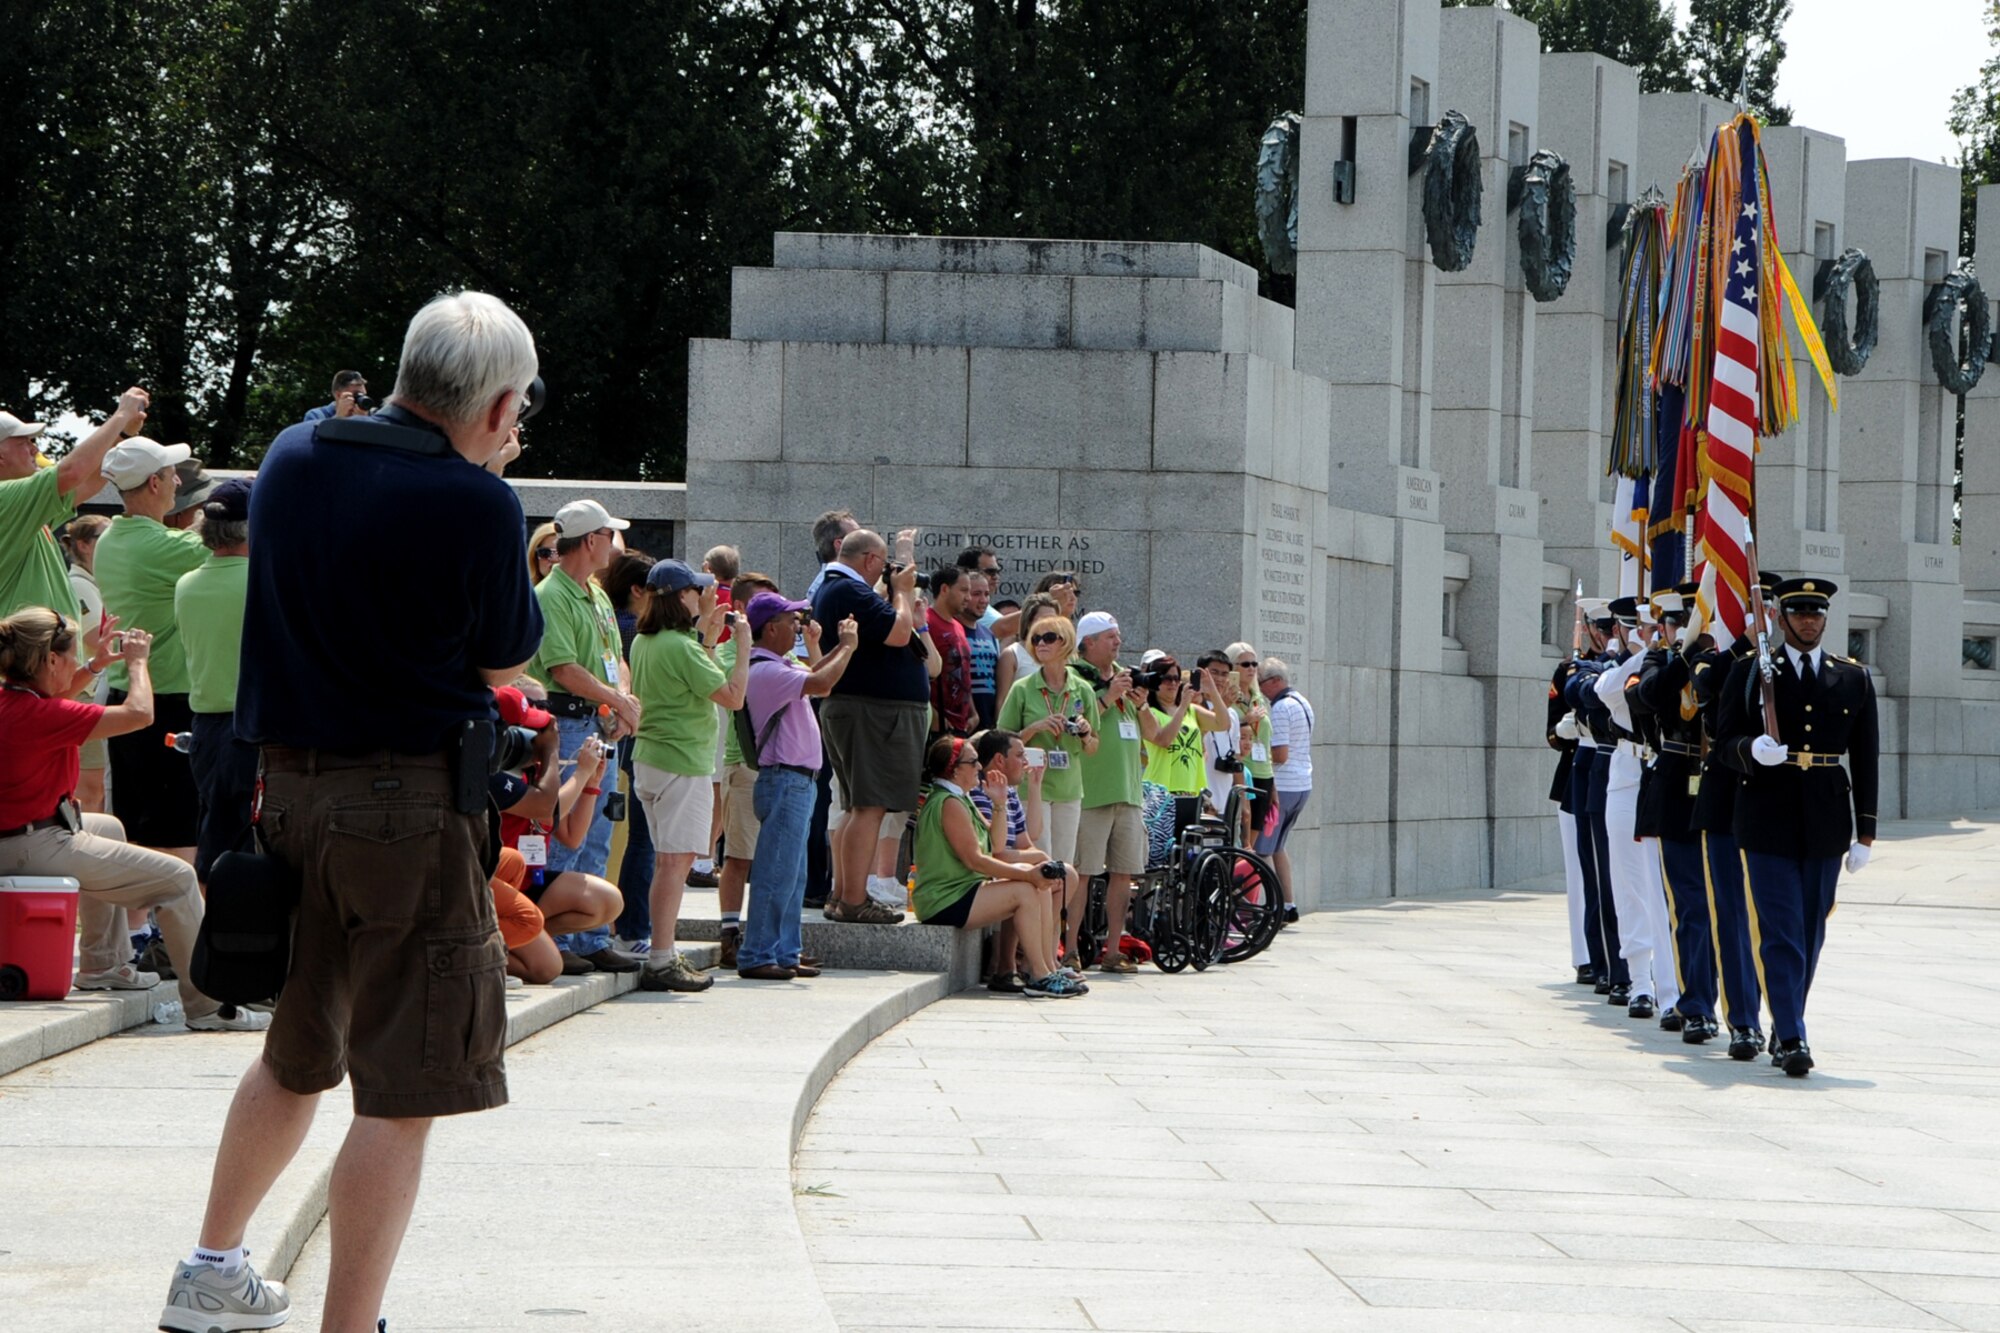 The USAF Honor Guard joins a Joint Service Color Team to pay tribute to
World War II veterans from the Chicago area during a Wreath Ceremony at the
National World War II Memorial on Sep. 2. The event was hosted by Honor
Flight Chicago in honor of World War II veterans from the Chicago area.
Honor Flight Chicago was founded to recognize World War II veterans by
flying them free-of-charge to Washington D.C. for a day of honor,
remembrance and celebration.  (U.S. Air Force photo/Staff Sgt. Matt Davis)
